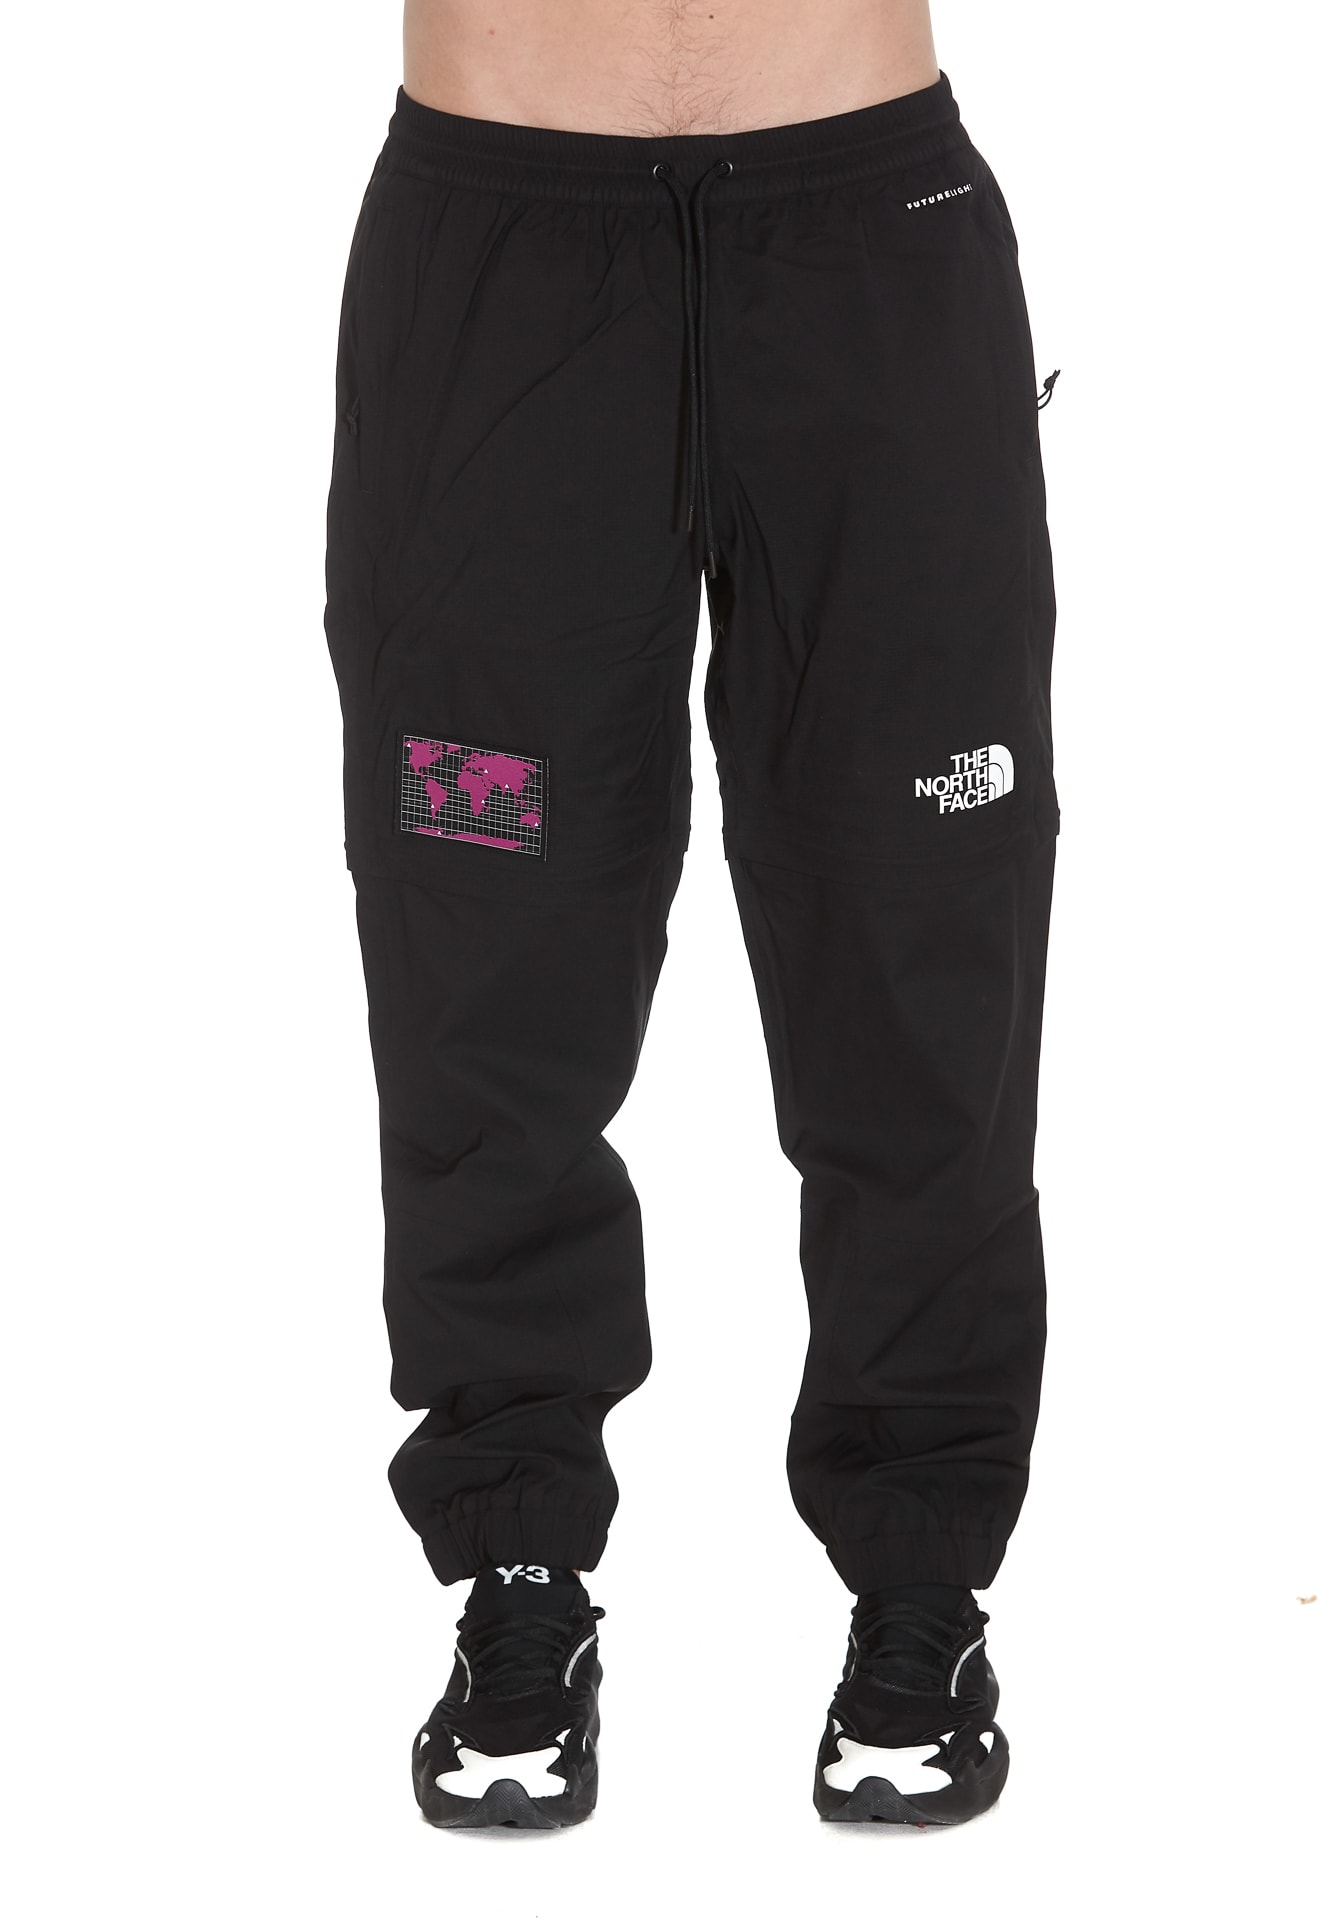 THE NORTH FACE PANTS,11263084